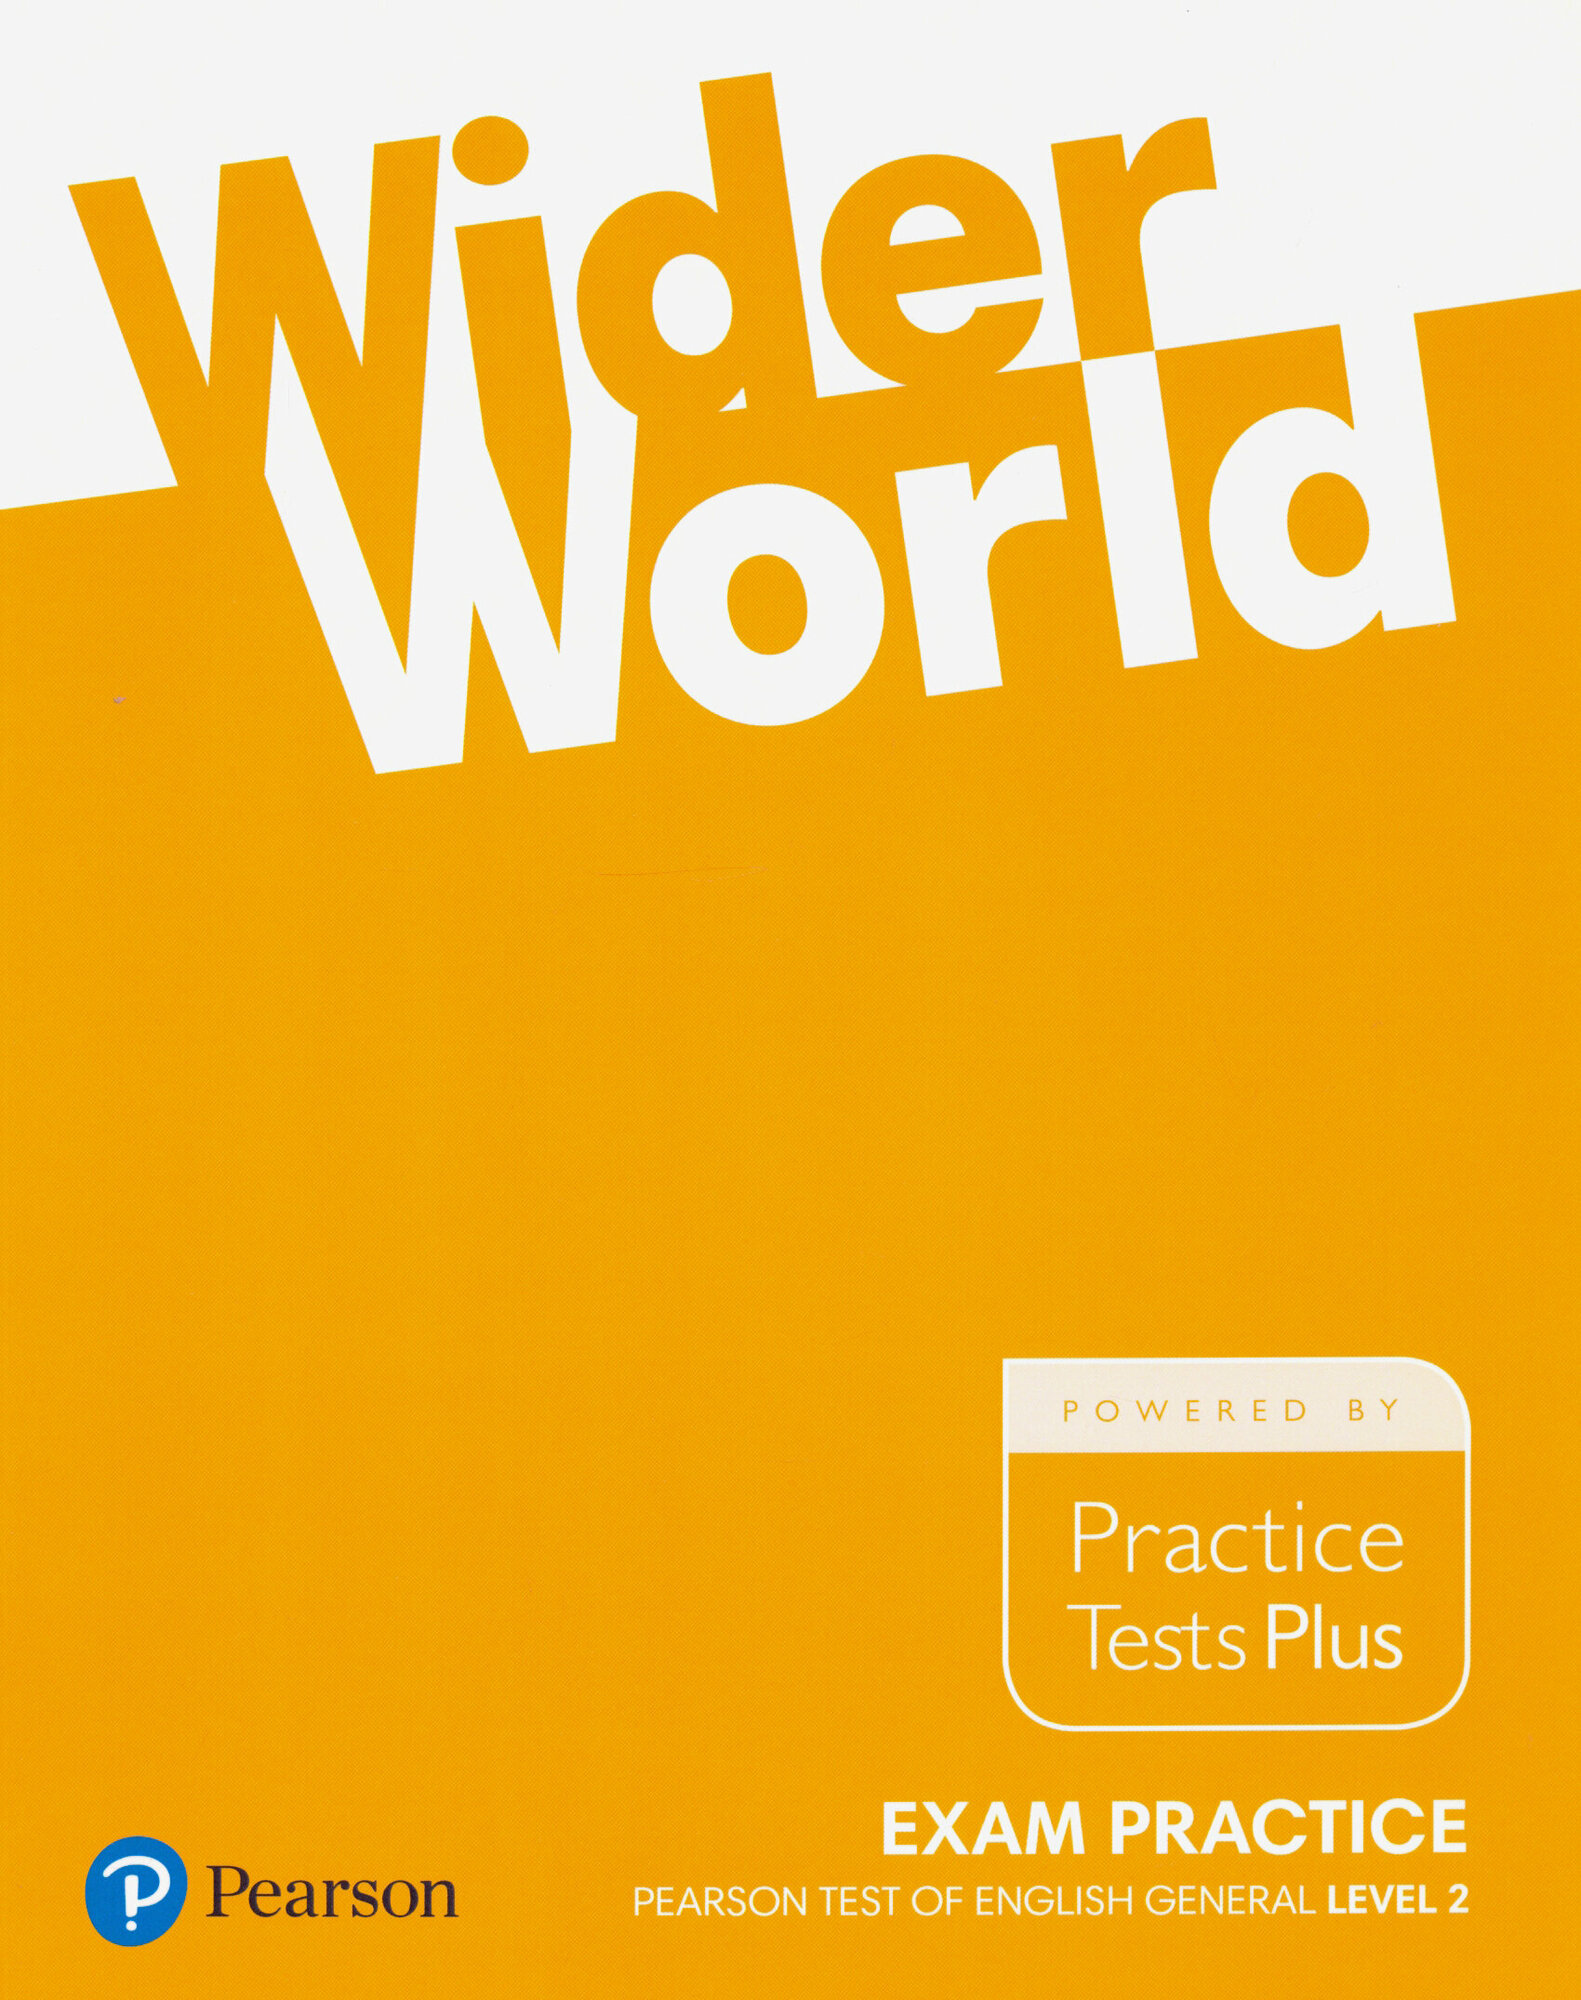 Wider World. Level 2. B1. Exam Practice Books. Pearson Tests of English General